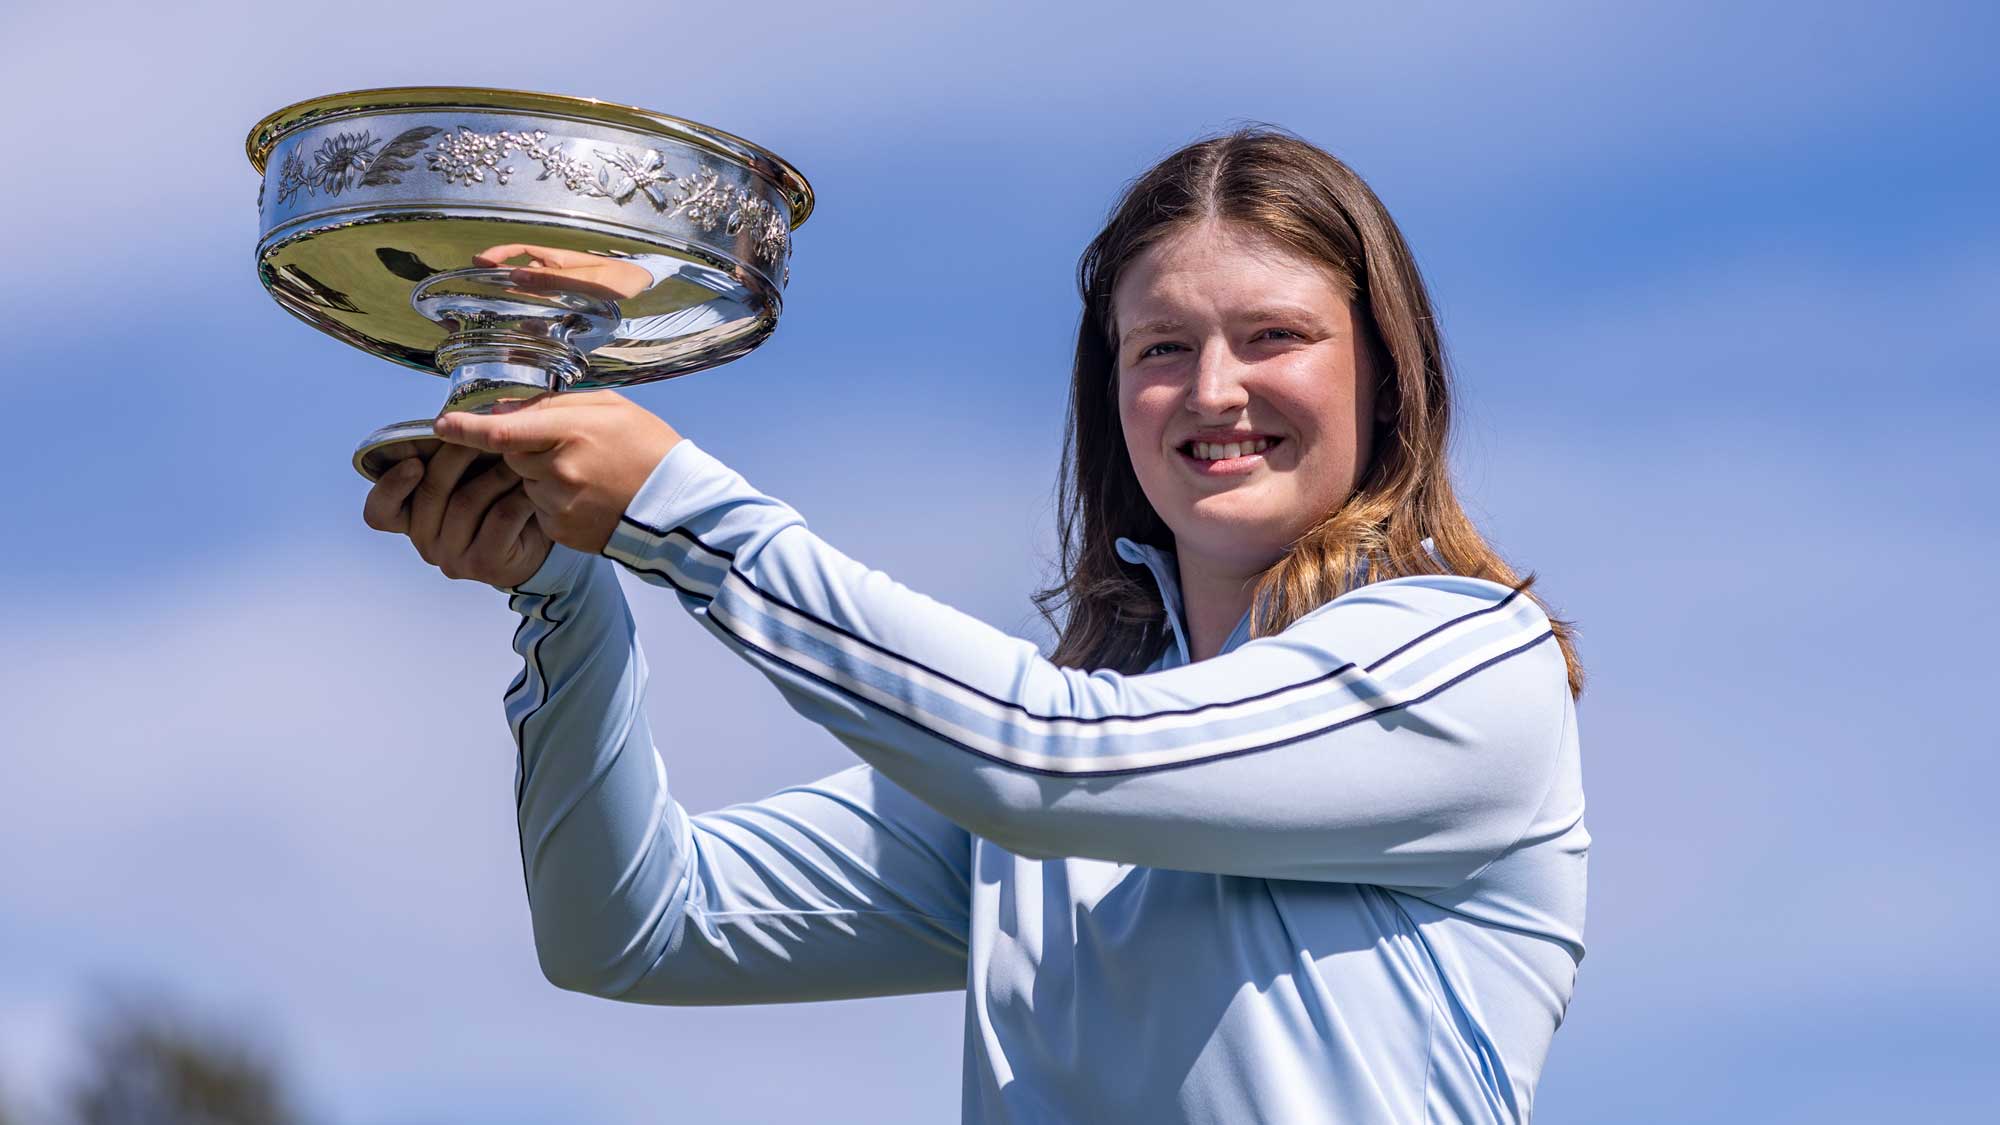 Lottie Woad with the ANWA trophy